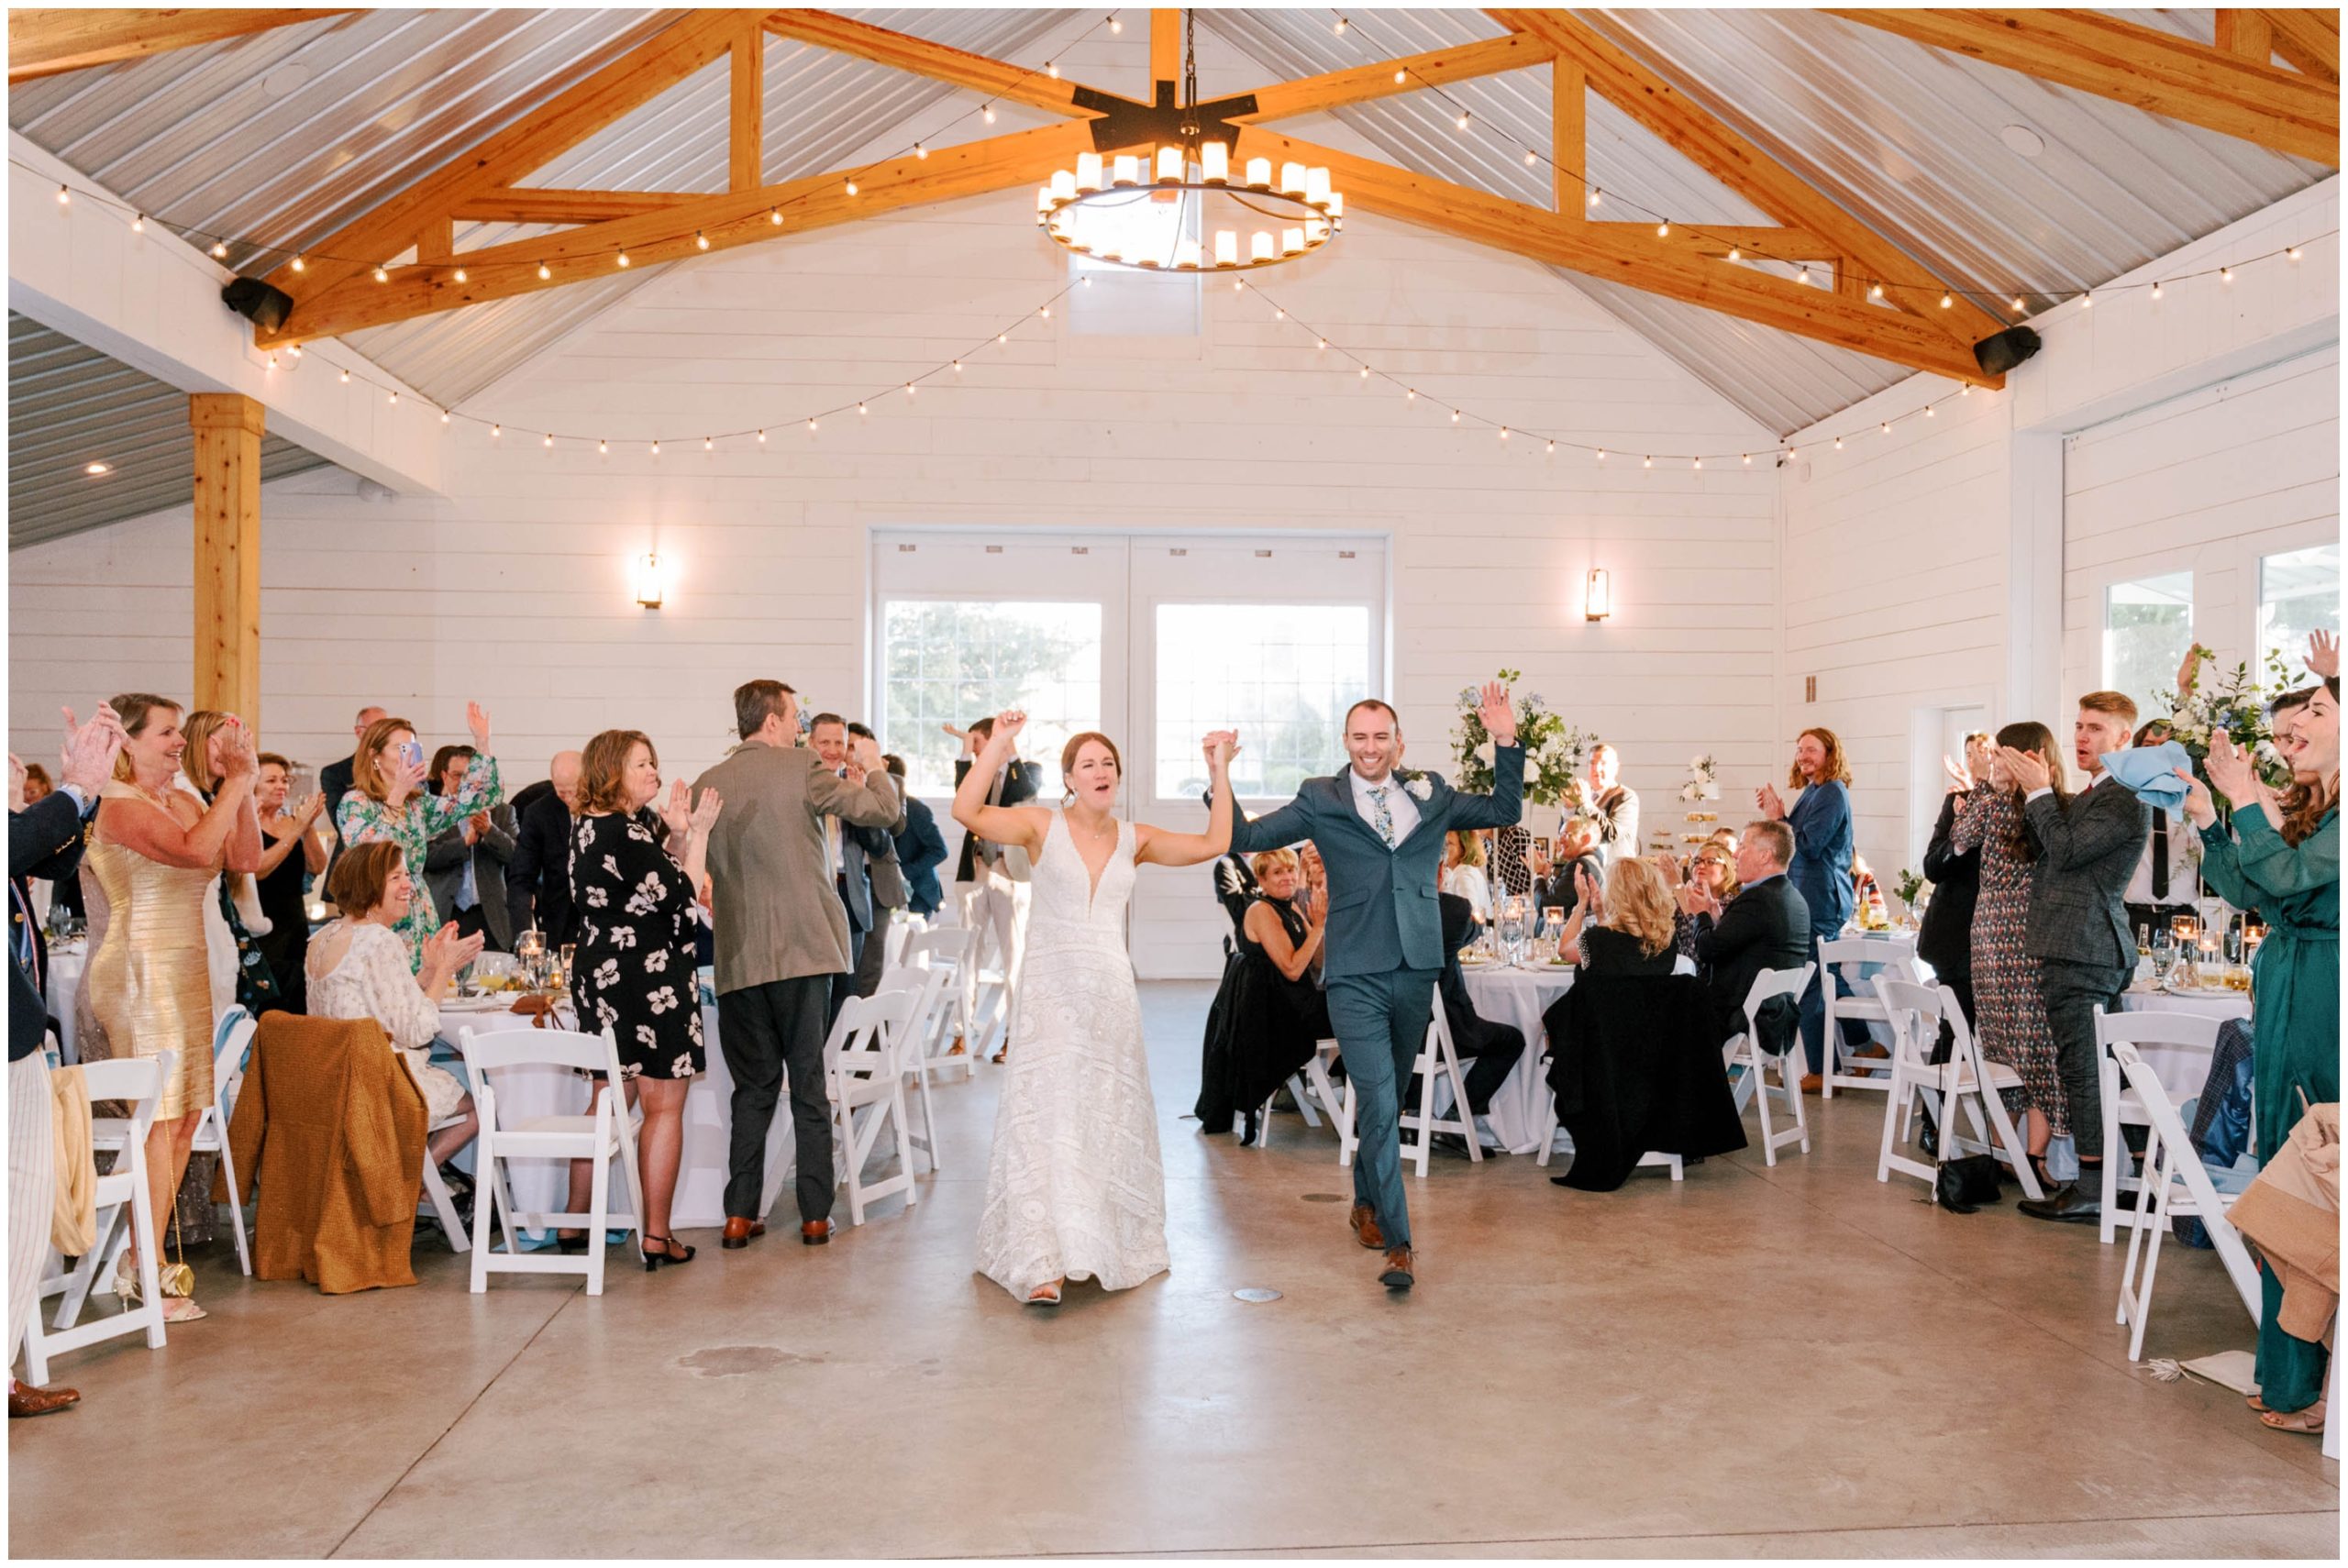 Reception in the barn pavilion at Walnut Hill